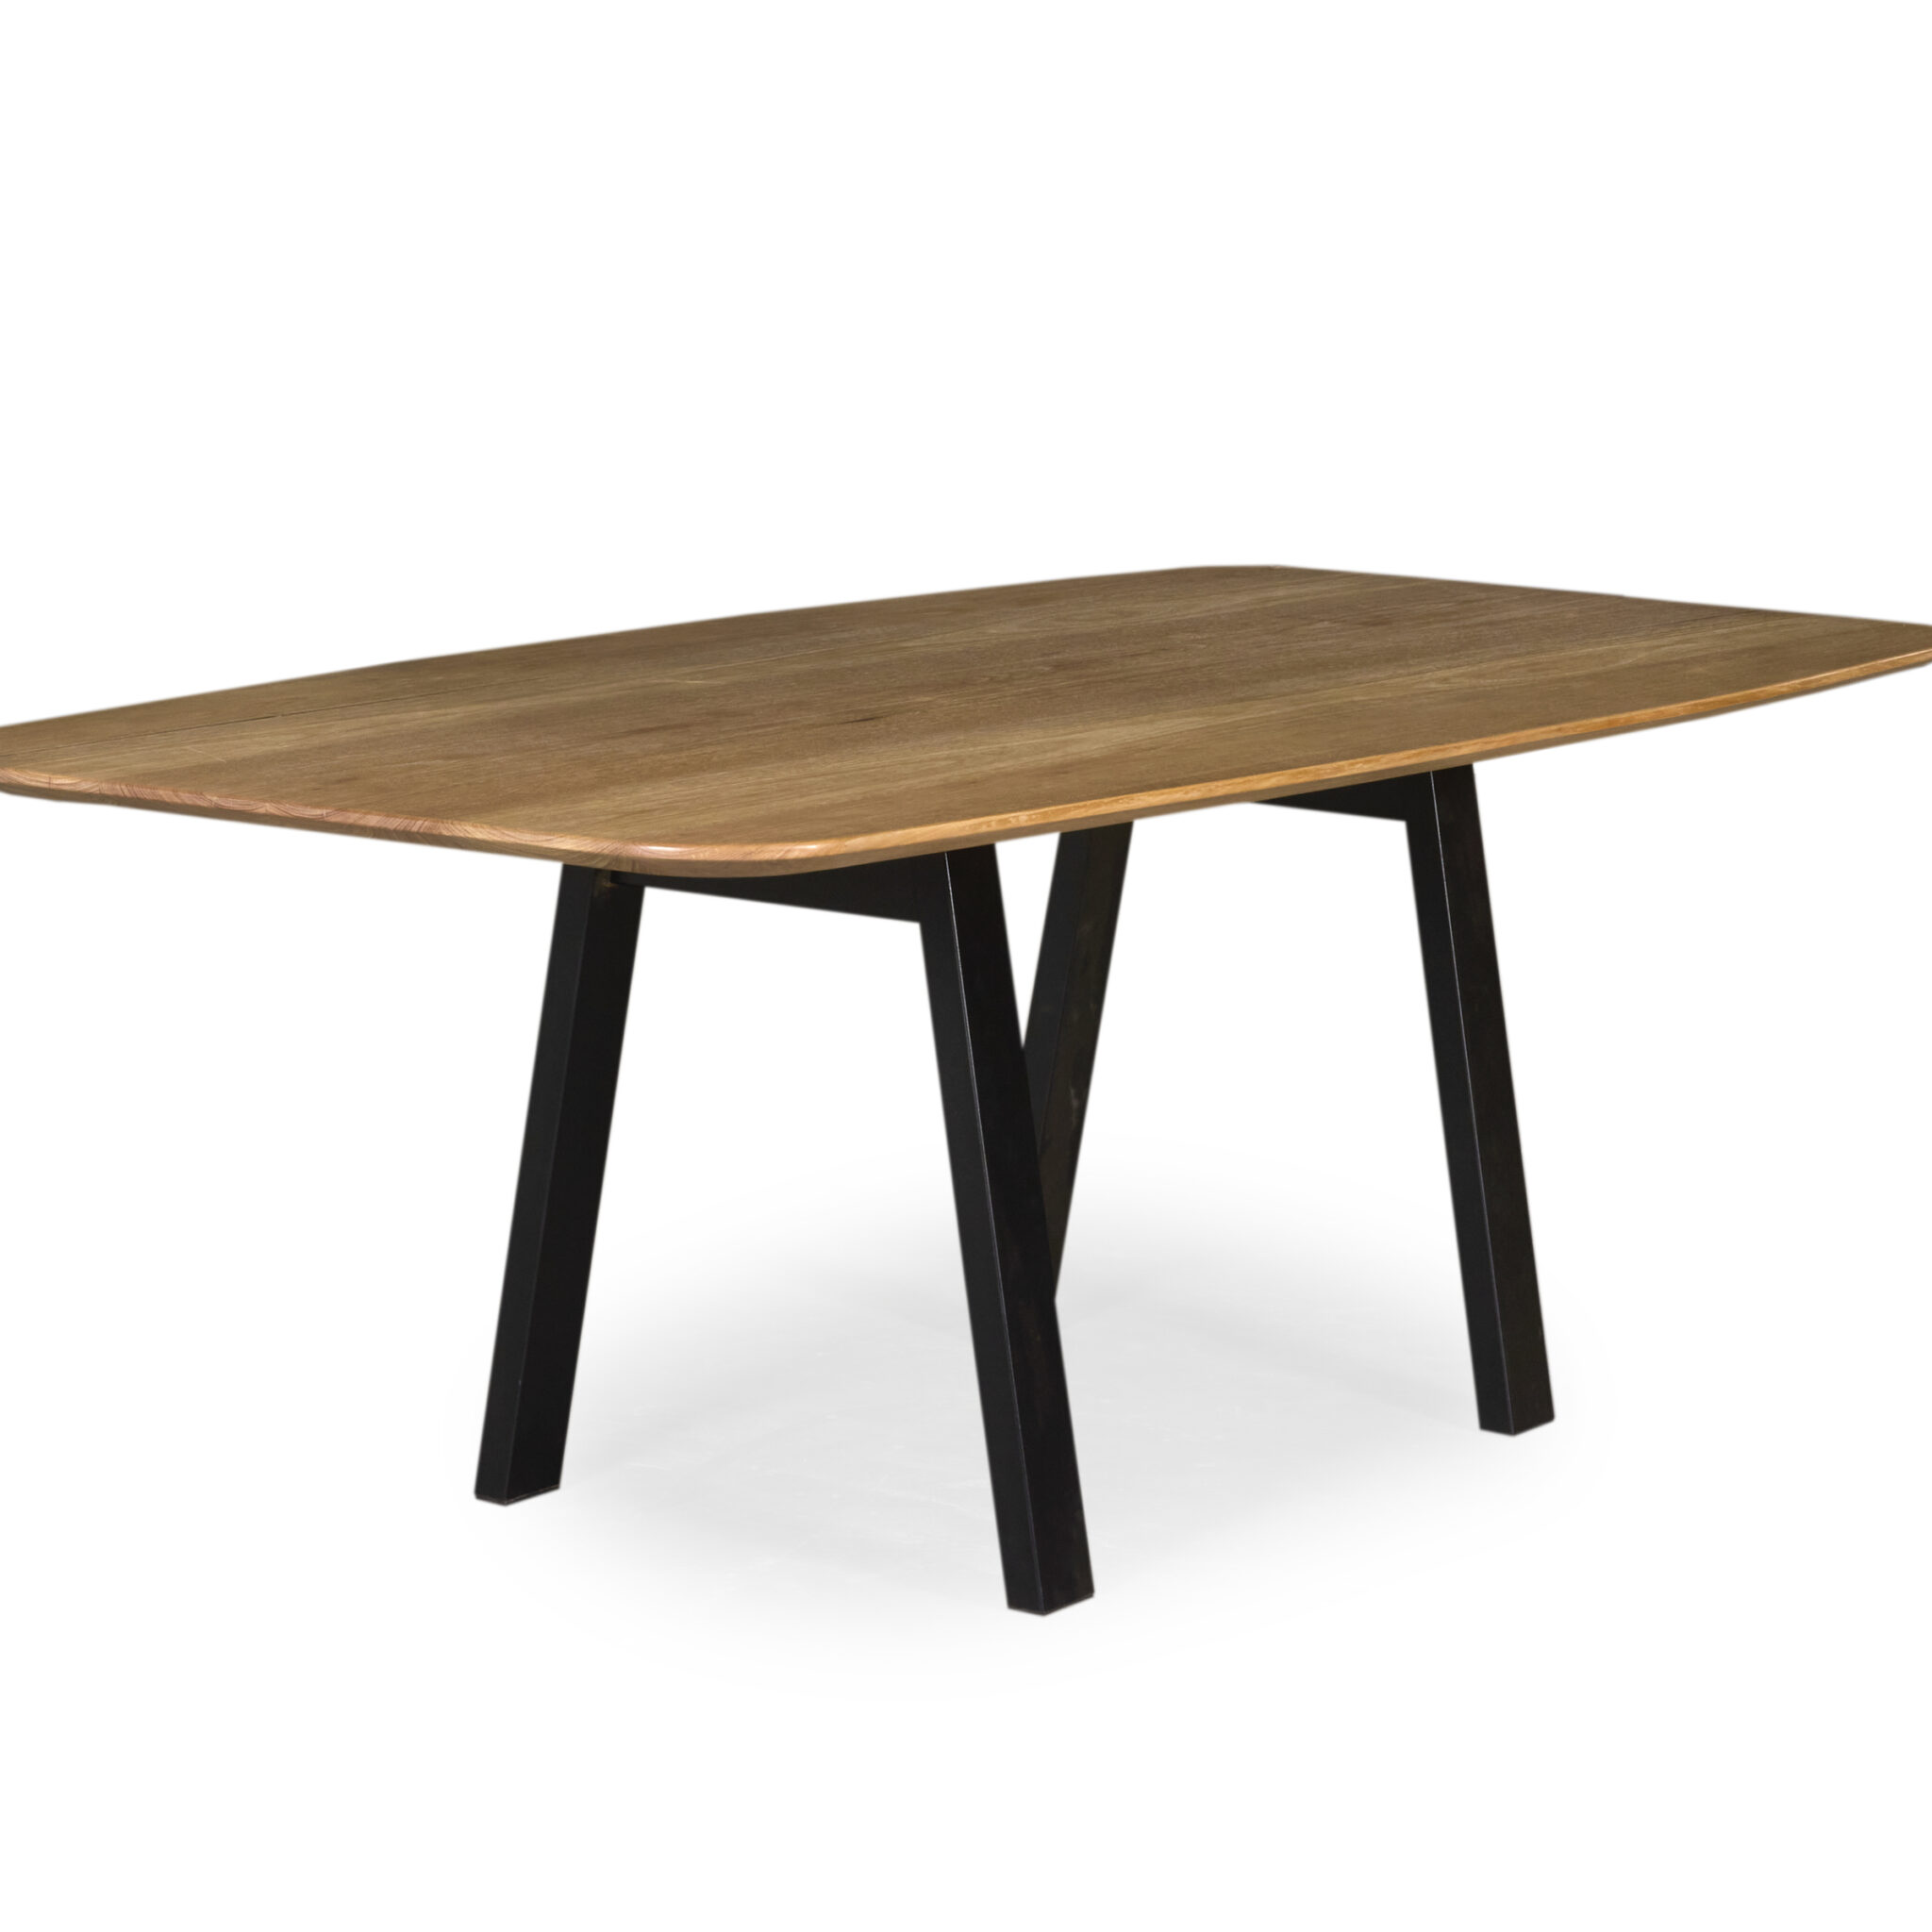 Neut Dining Table: Crafted from Victorian Ash timber with Kooyong Black Steel base.